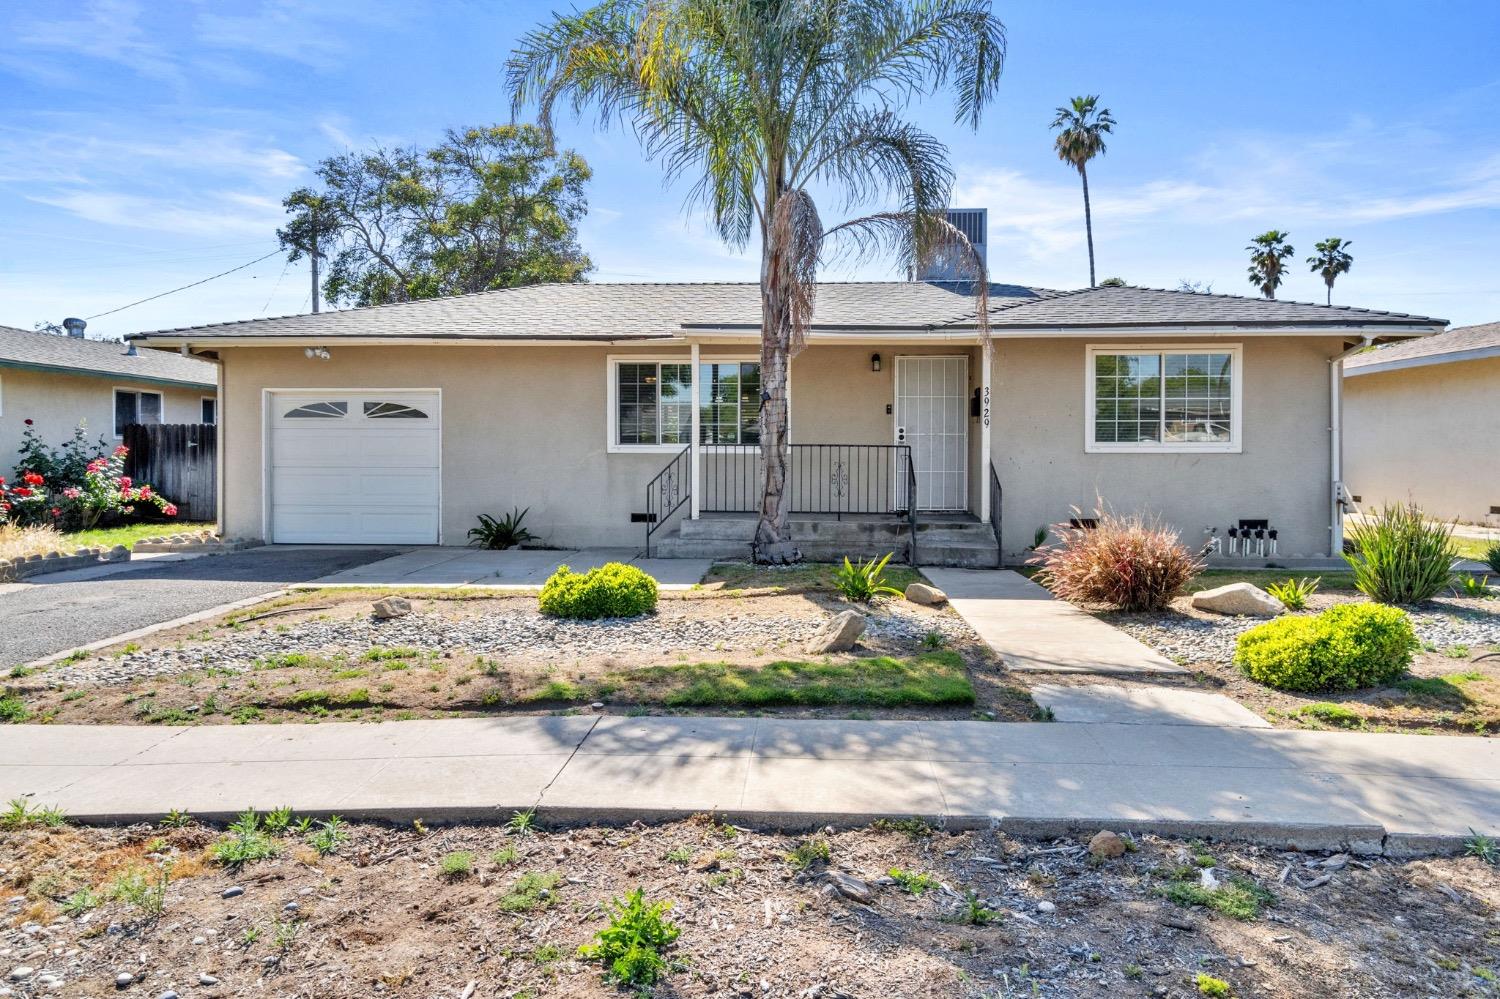 Photo of 3929 N Pleasant Ave in Fresno, CA